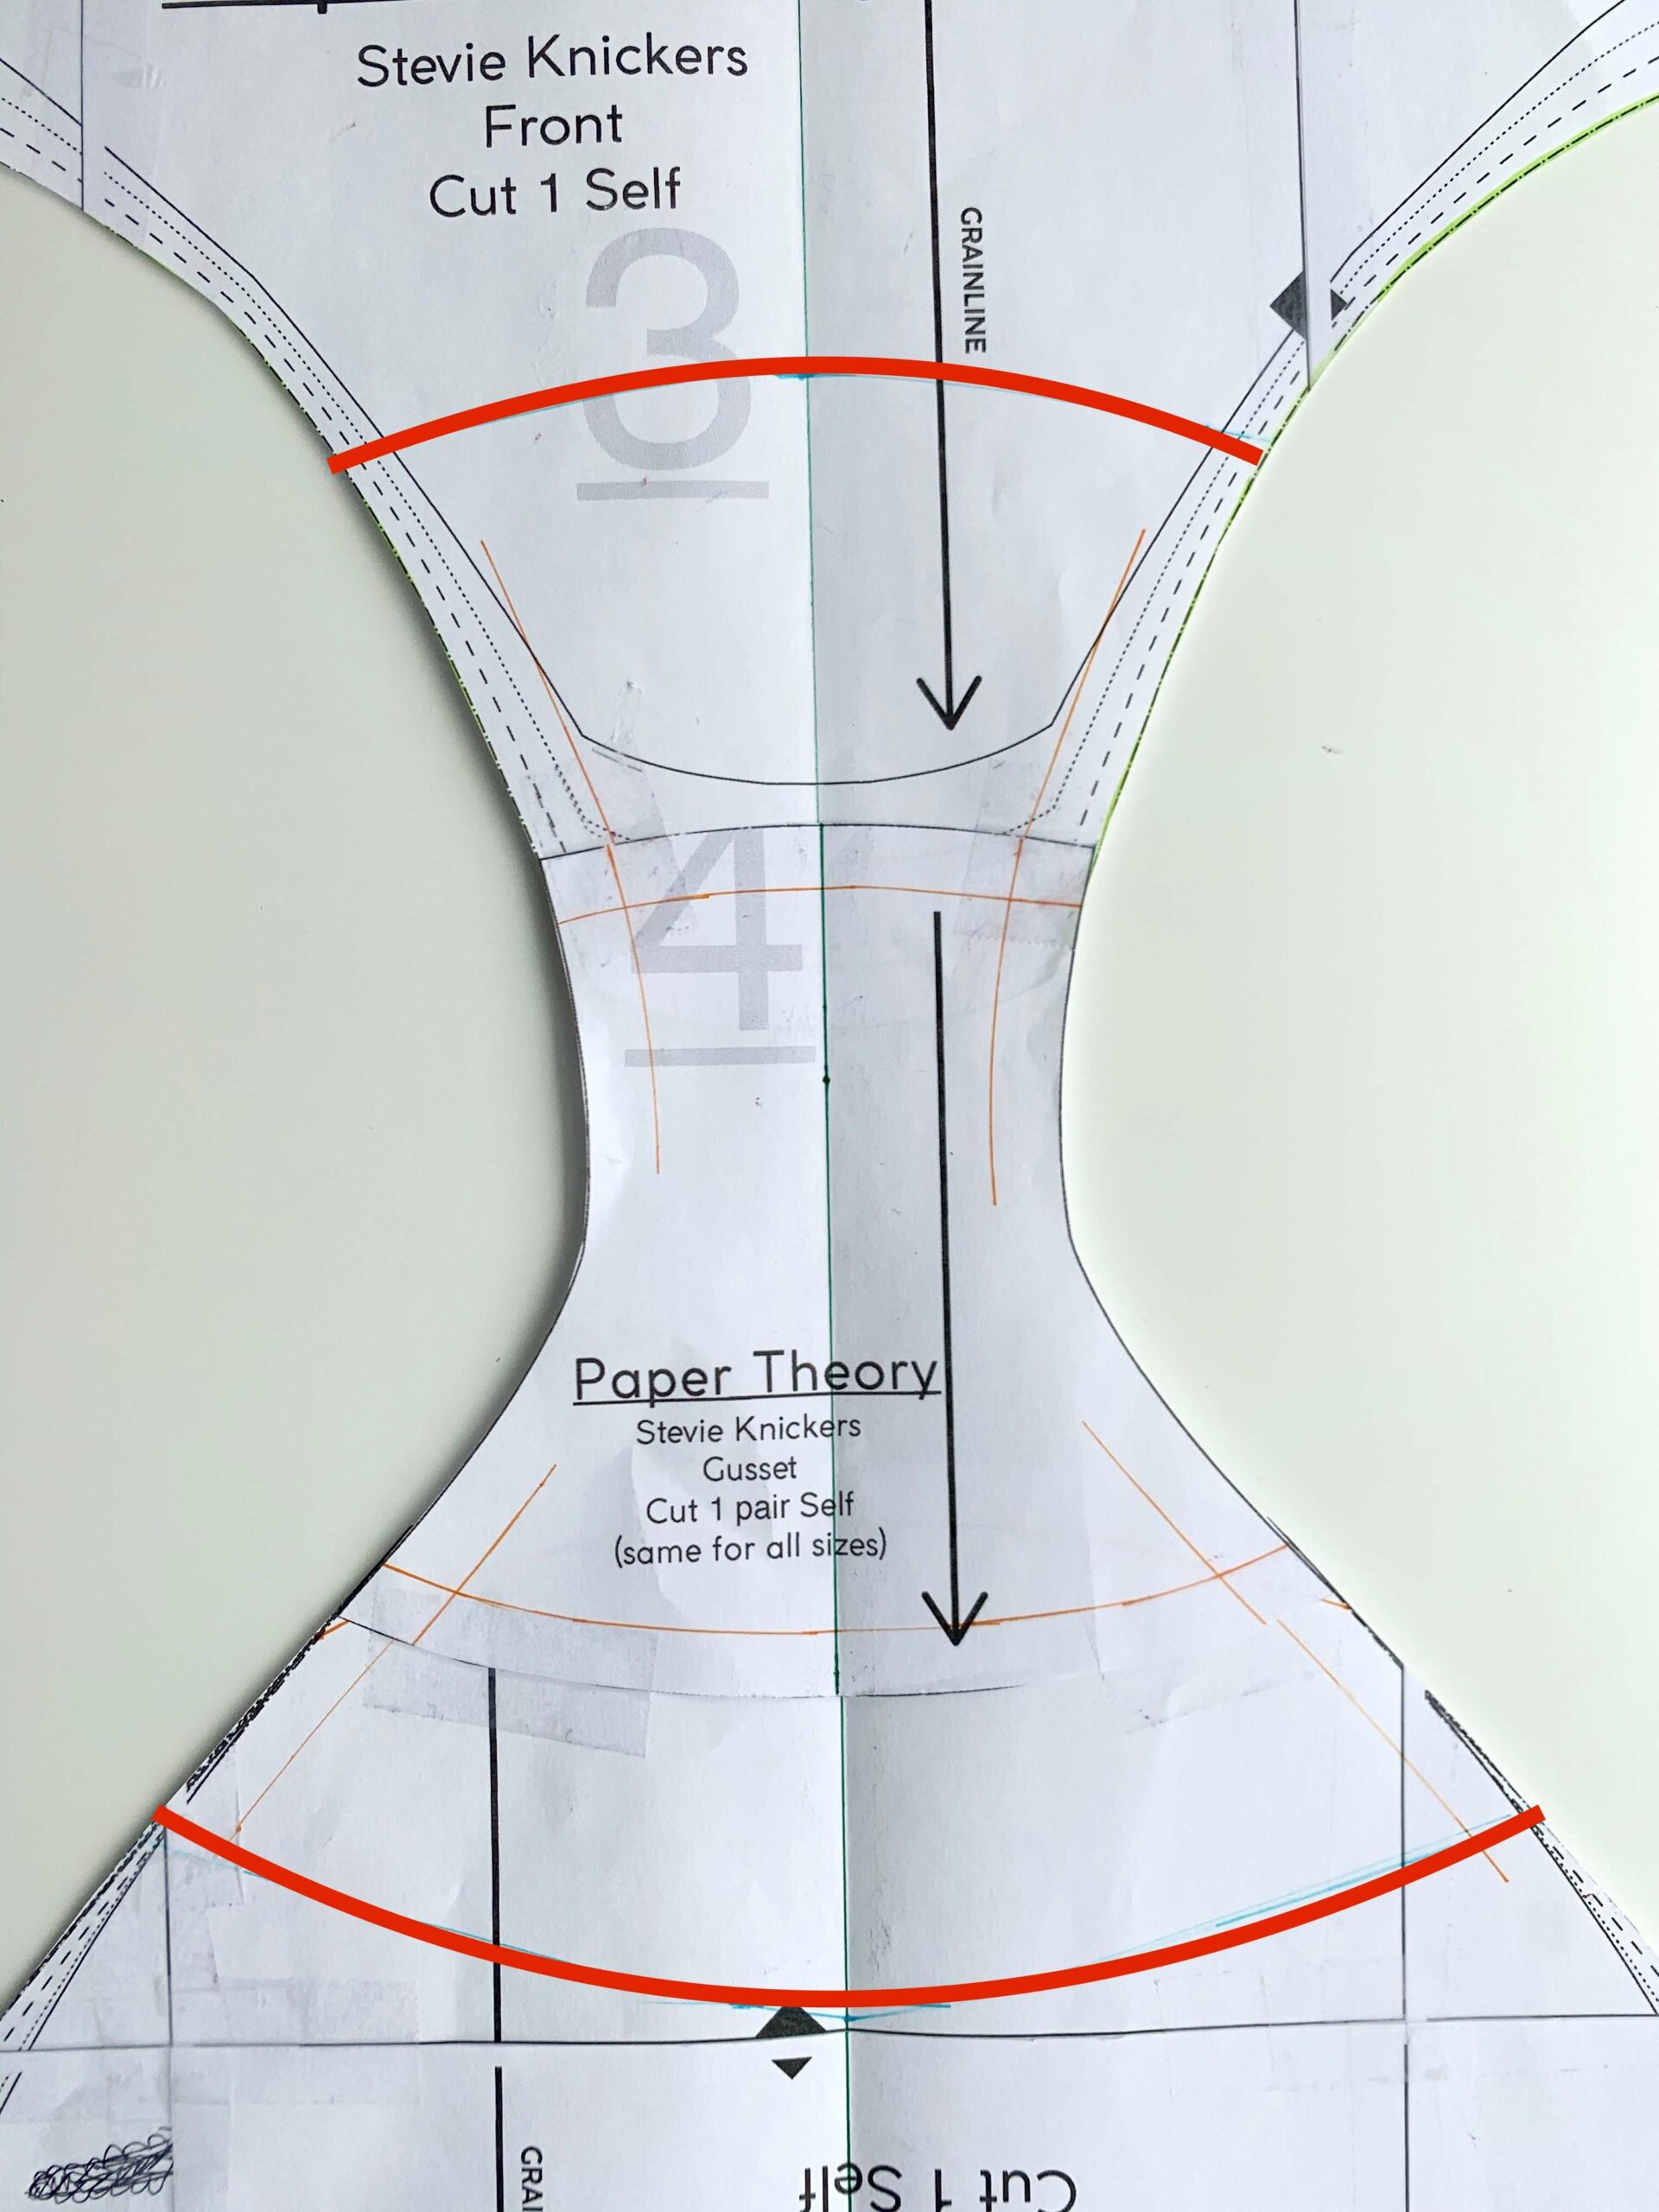 Gusset lines marked in red